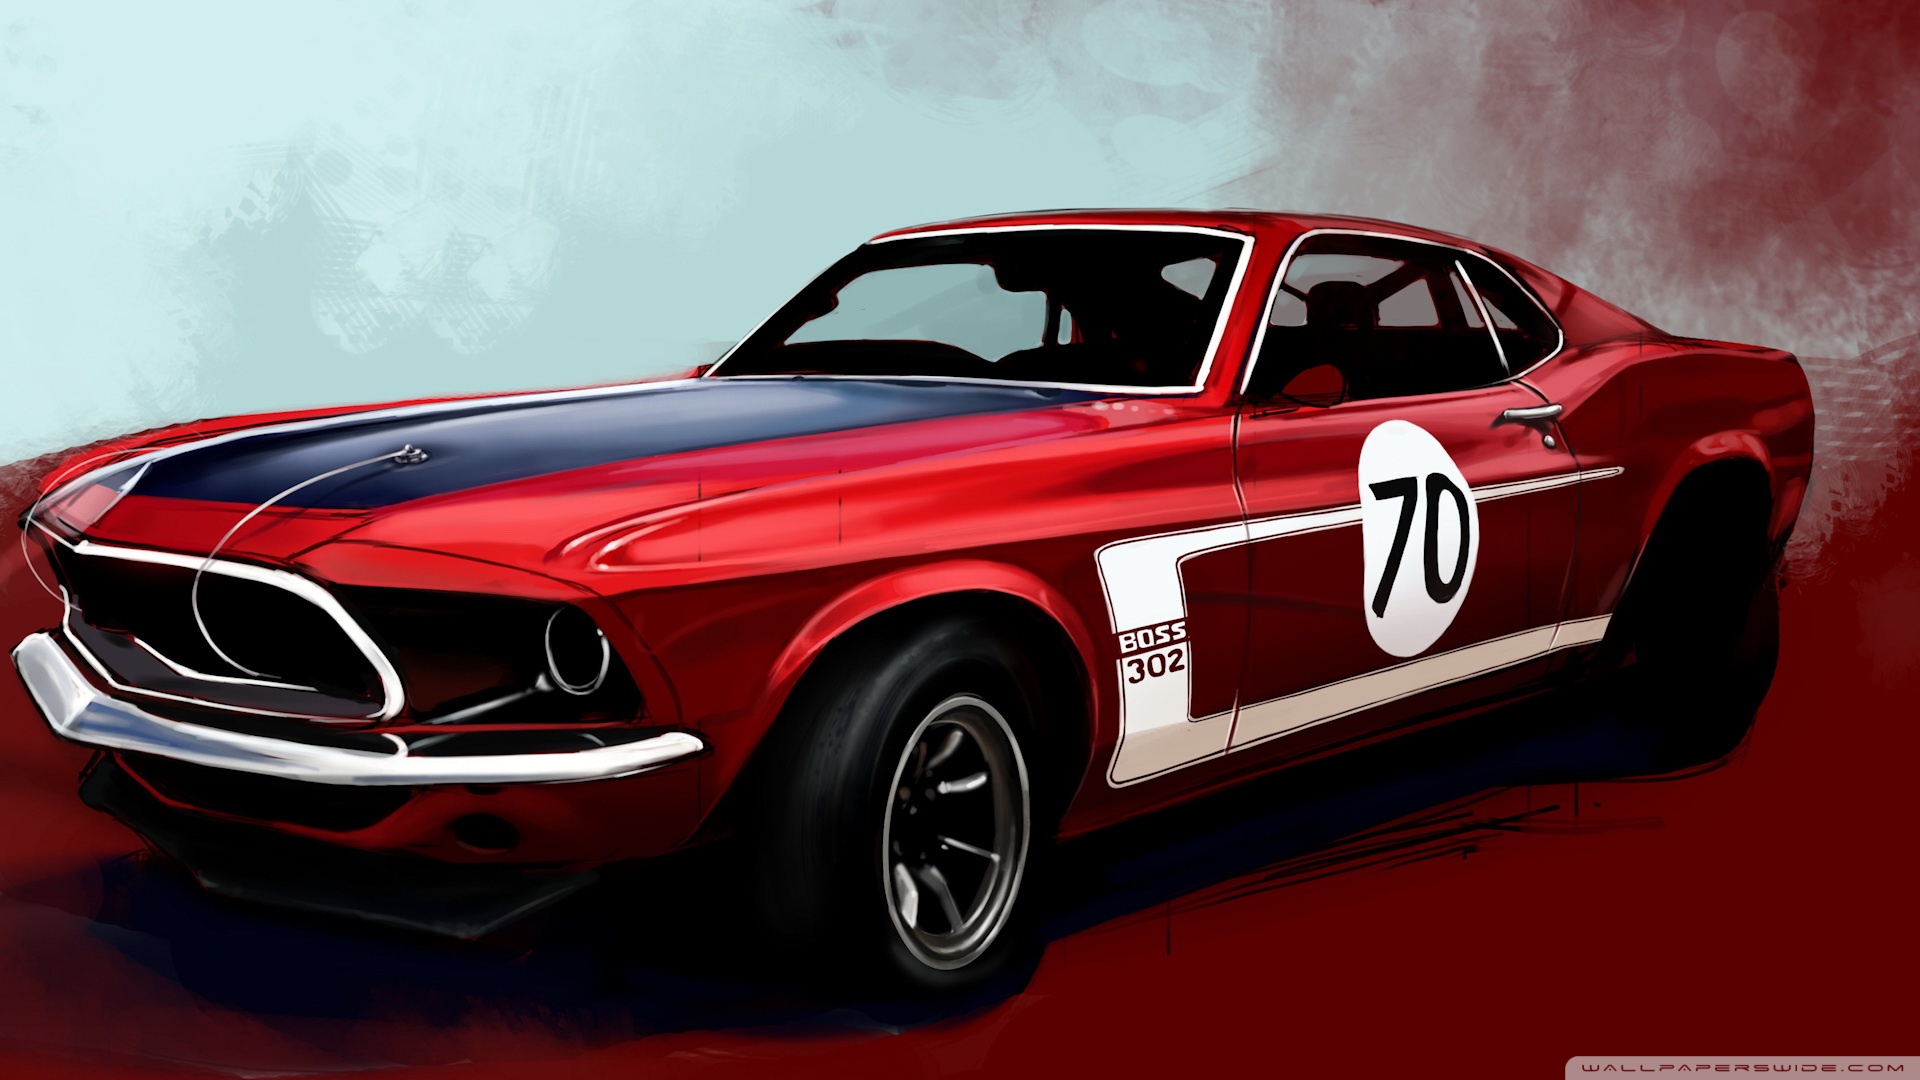 Ford Mustang Boss 302 Classic Car Wallpaper Old Mustang Wallpaper Hd 1920x1080 Wallpaper Teahub Io